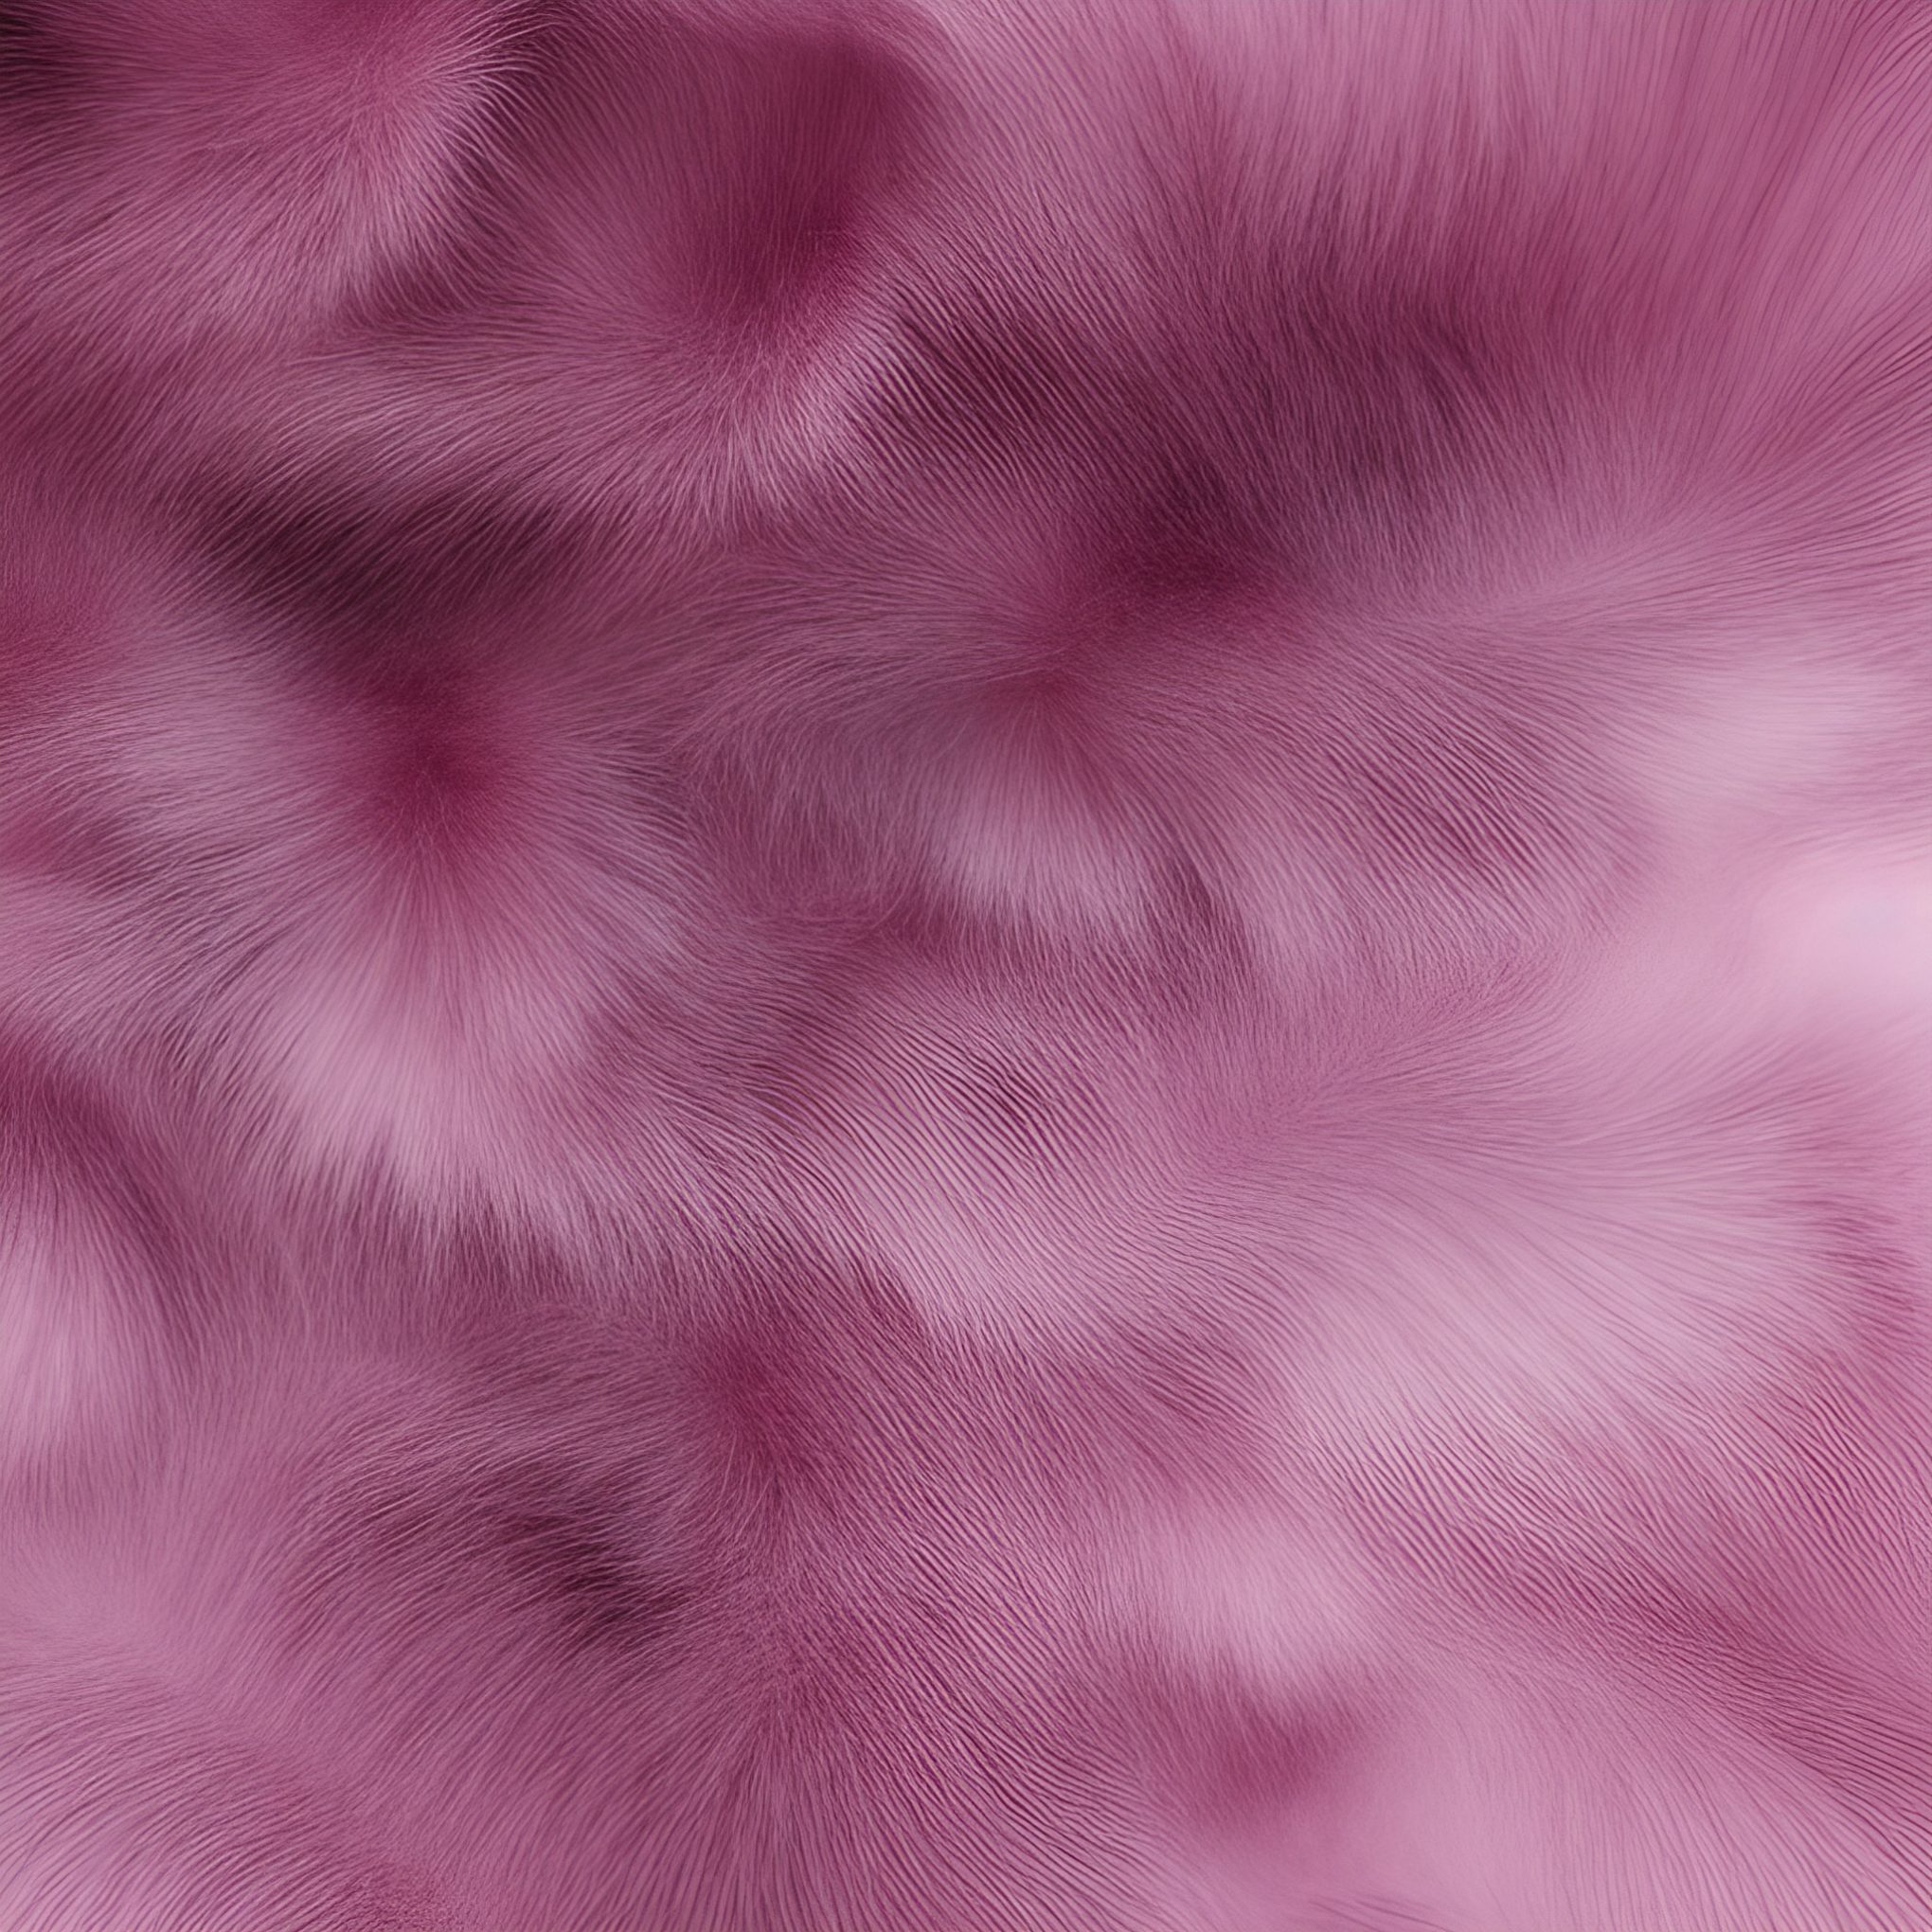 Pink Fluffy fur background texture free image